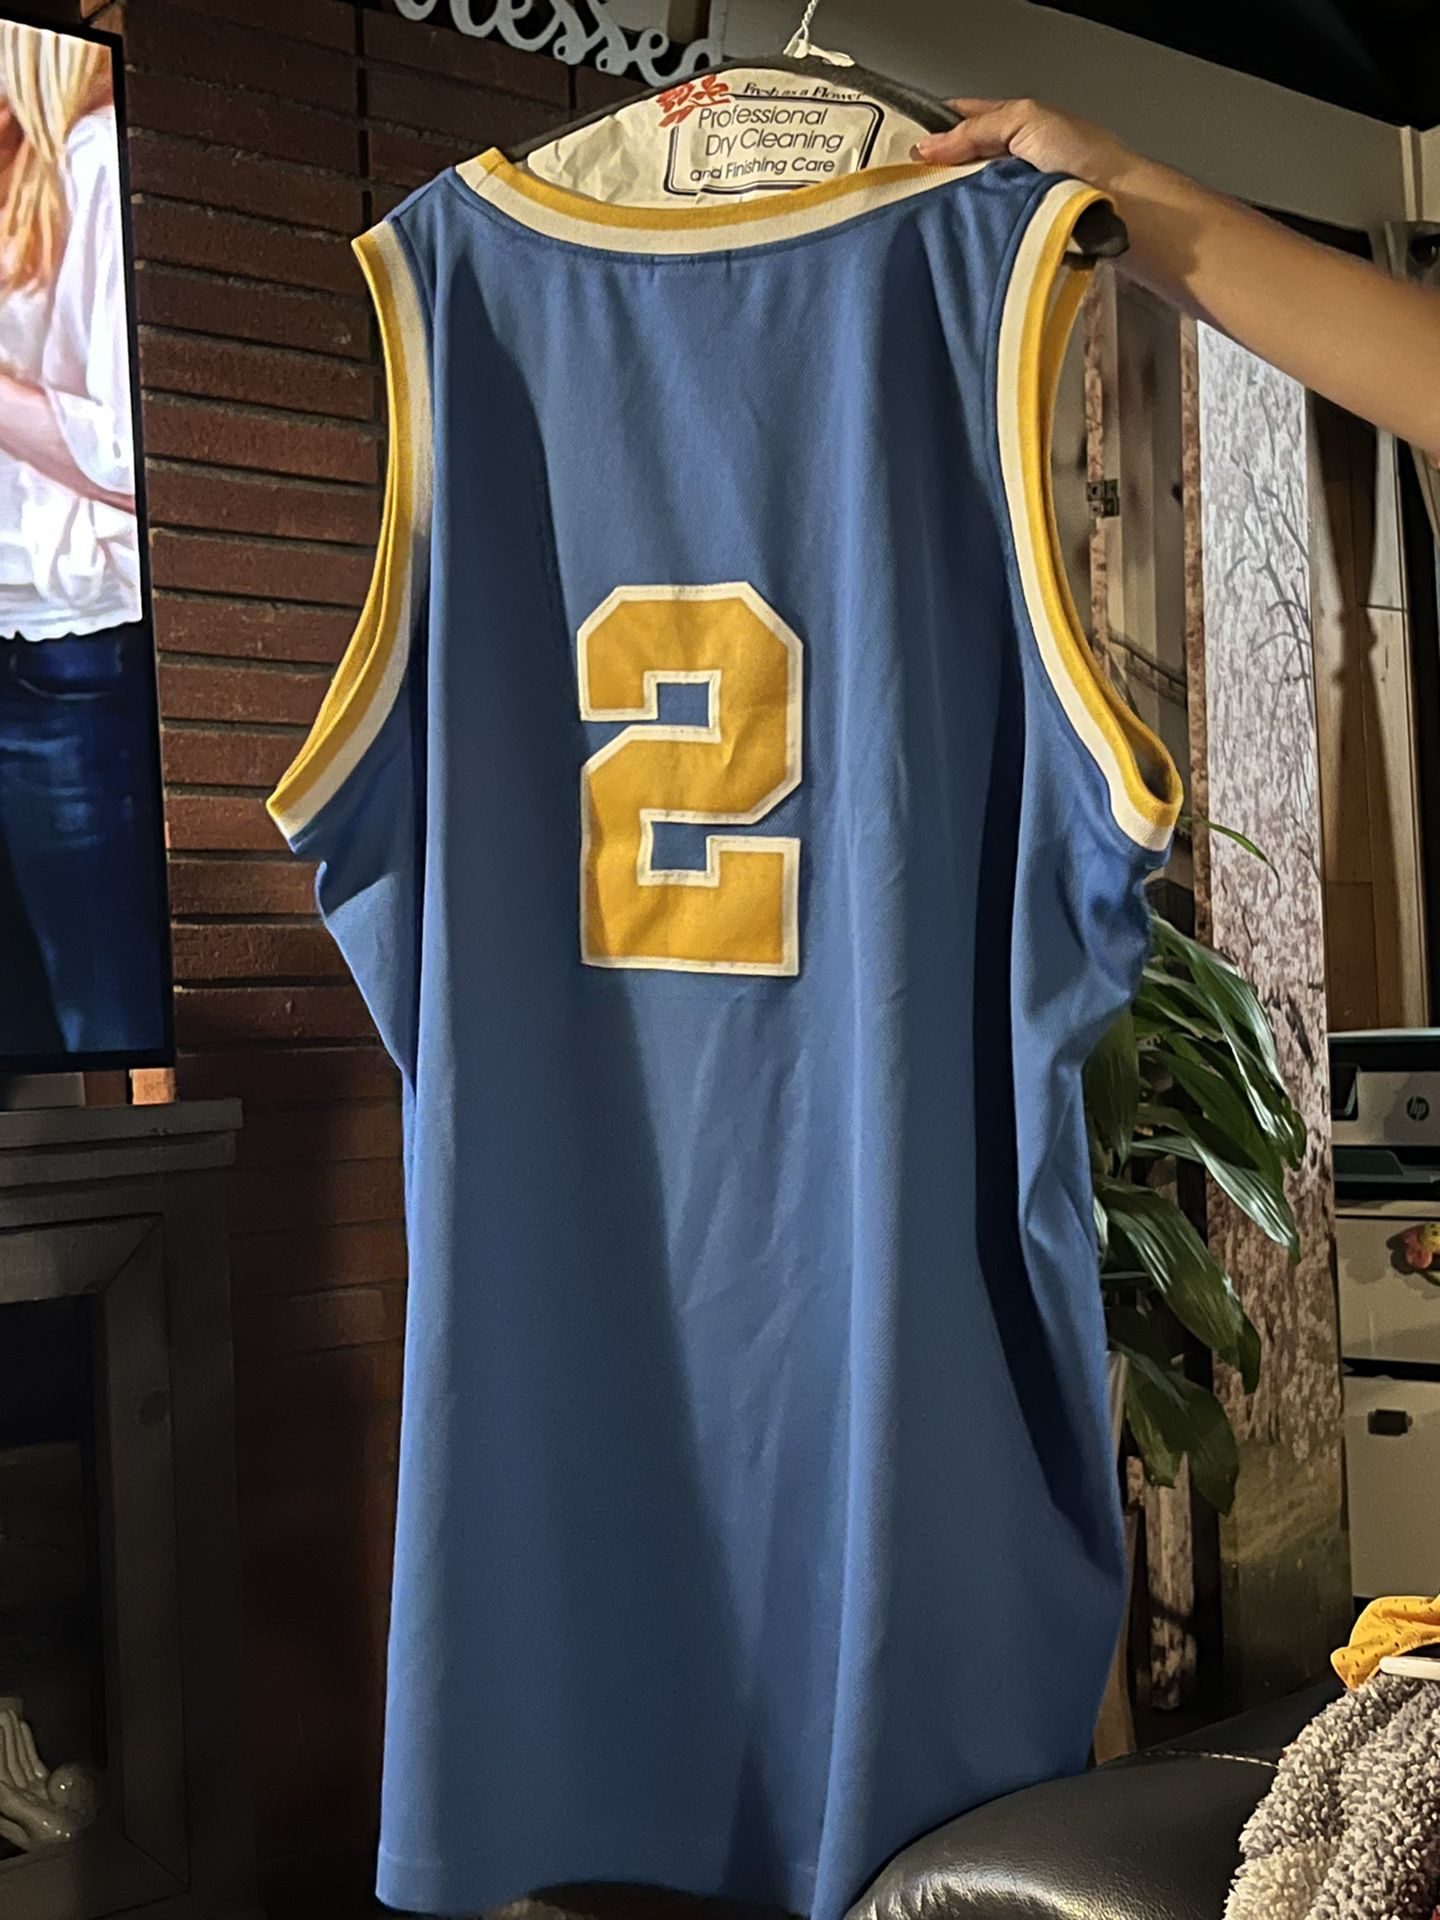 Lakers Lonzo Ball Jersey (large) for Sale in Bothell, WA - OfferUp